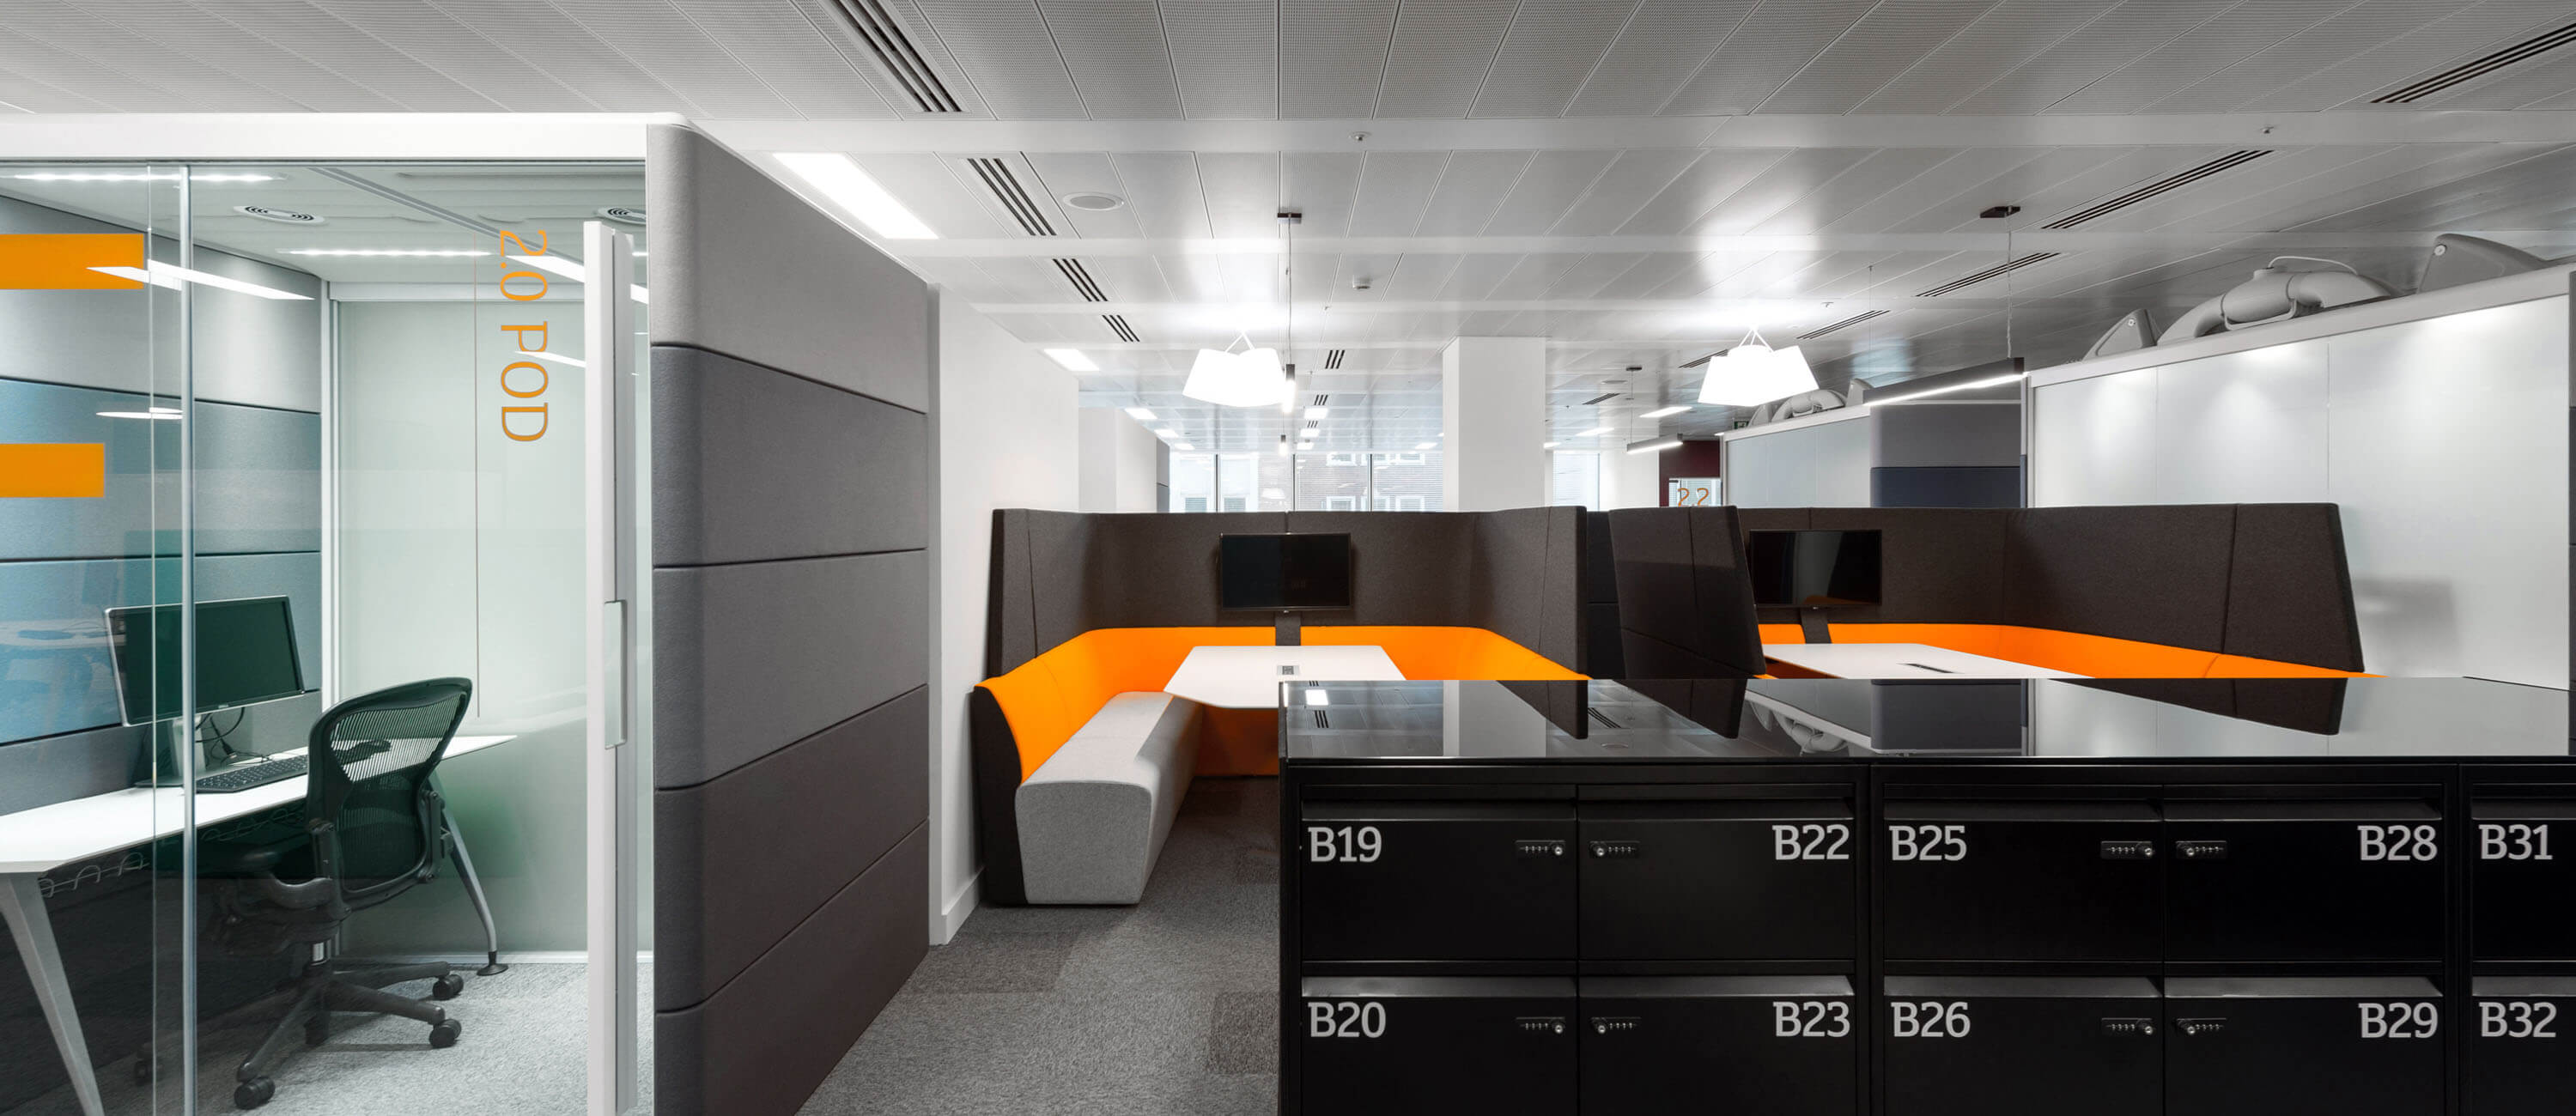 View of productive office spaces, allowing for hot desking and integration among employees.